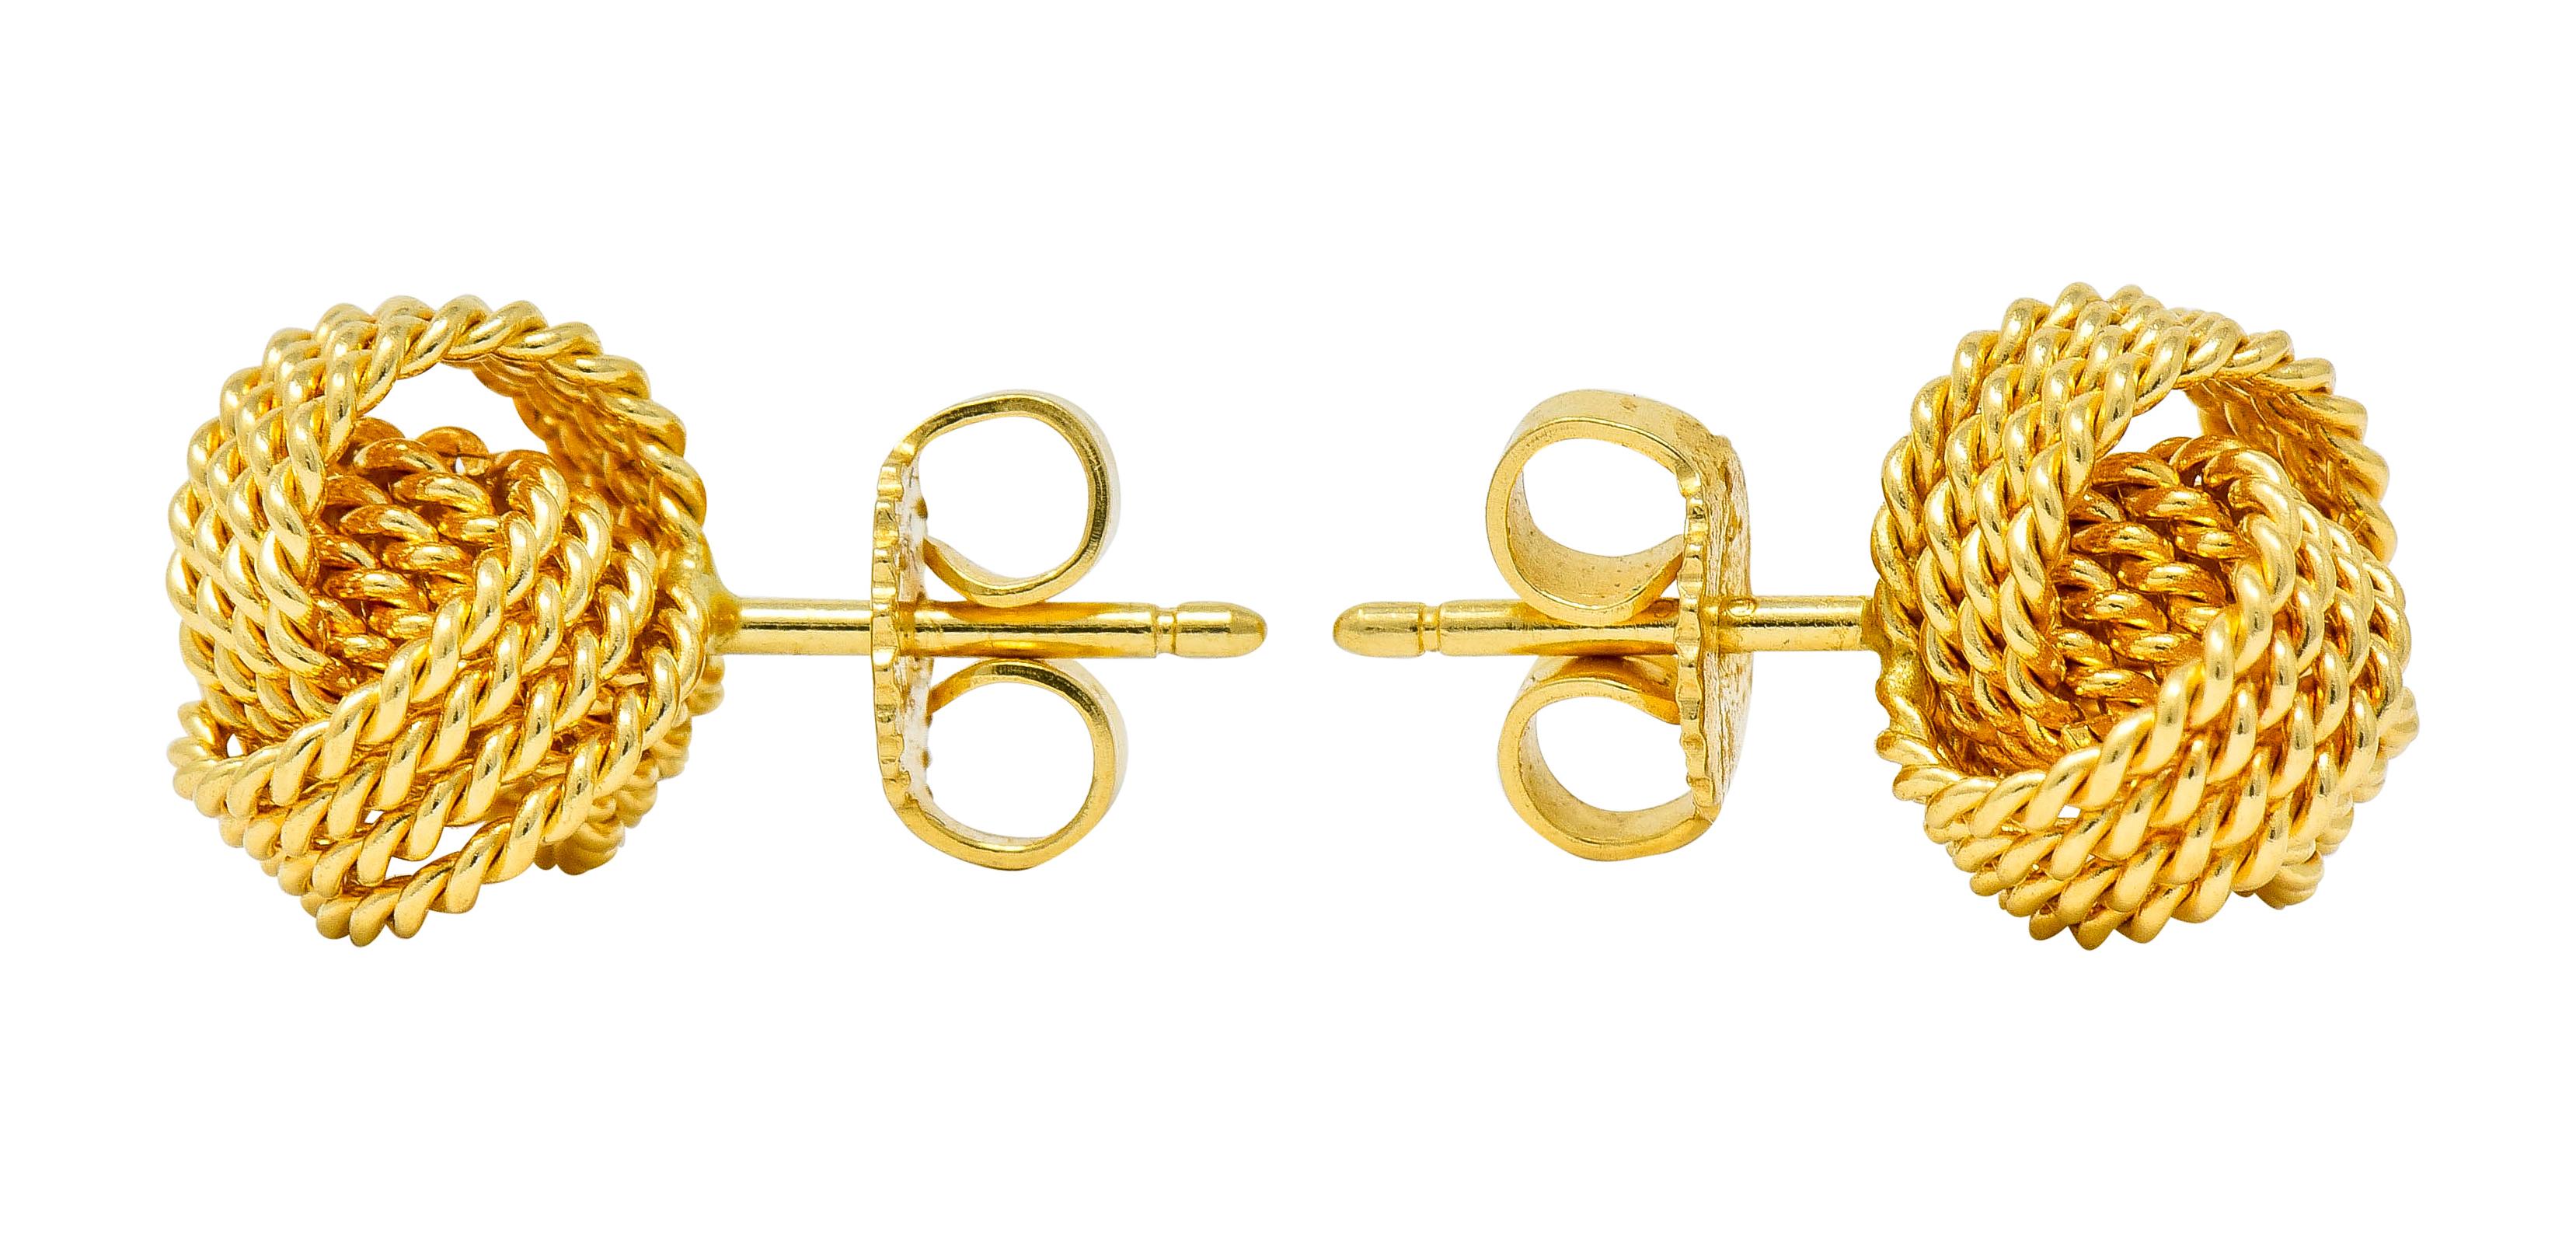 Stud style earrings designed as three circular loops comprised of a twisted rope motif

Intersecting as a love knot motif

From the Tiffany Twist collection, circa 2000s

Completed by posts and friction backs

Posts are signed T & Co. and stamped